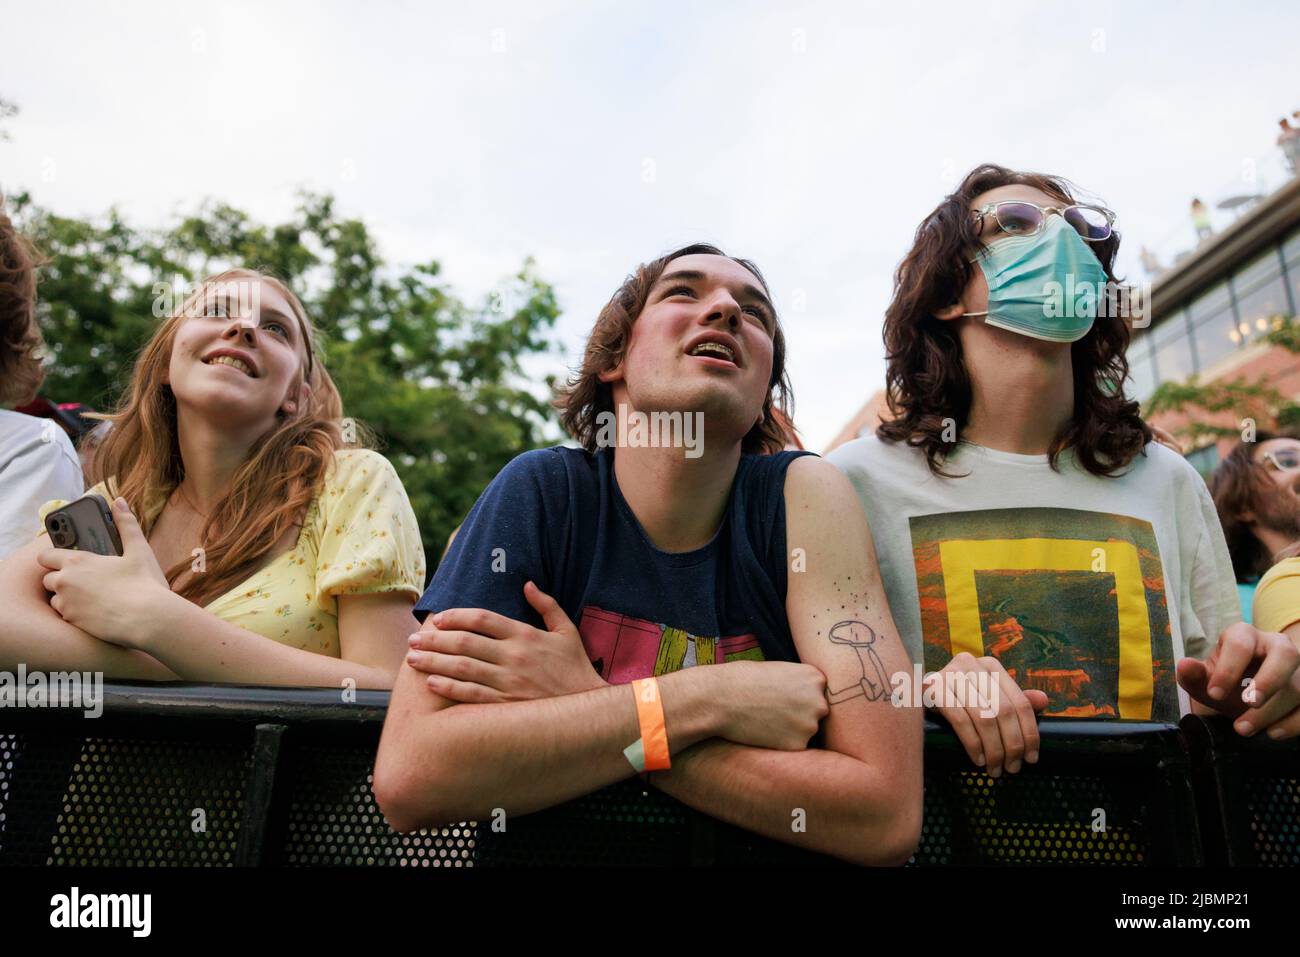 BLOOMINGTON, INDIANA - JUNE 4: An audience watches Car Seat Headrest perform during the Granfalloon festival on June 4, 2022, in Bloomington, Indiana. ÒGranfalloon is an annual festival of arts, music, and scholarship inspired by Hoosier author Kurt Vonnegut,Ó according to the eventÕs webpage. The festival takes place in Bloomington, Indiana. Stock Photo